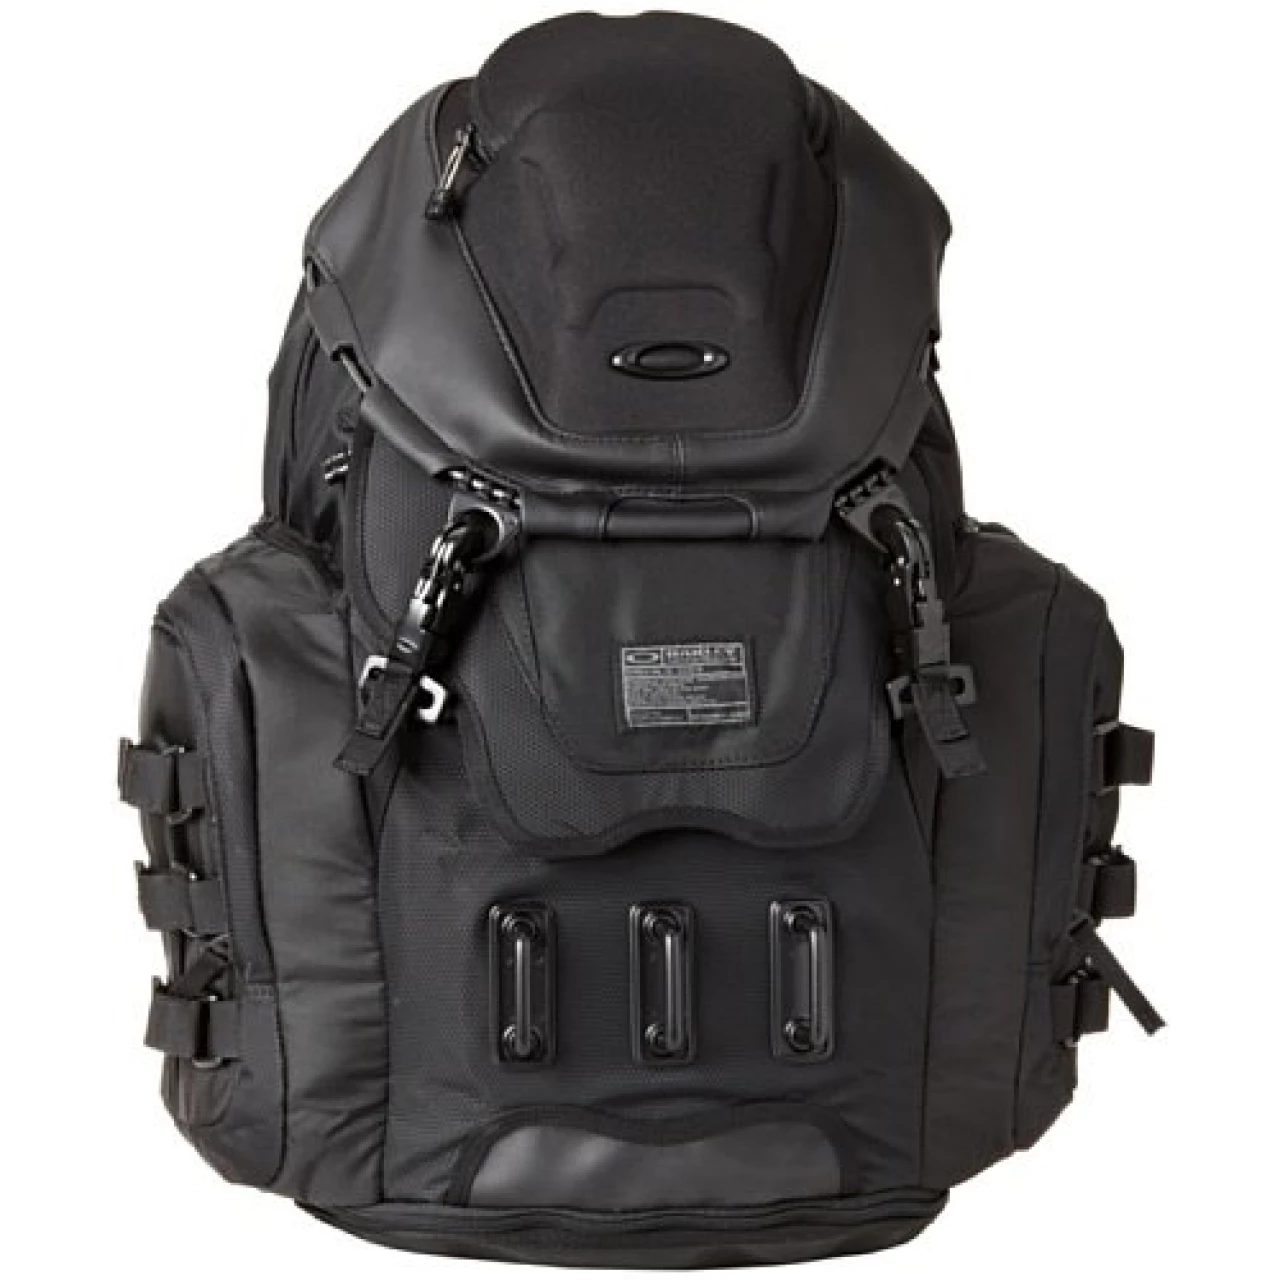 Portable, Oakley Men&rsquo;s Kitchen Sink Backpack, Stealth Black, One Size Color: Stealth Black Size: One Size Consumer Electronic Gadget Shop